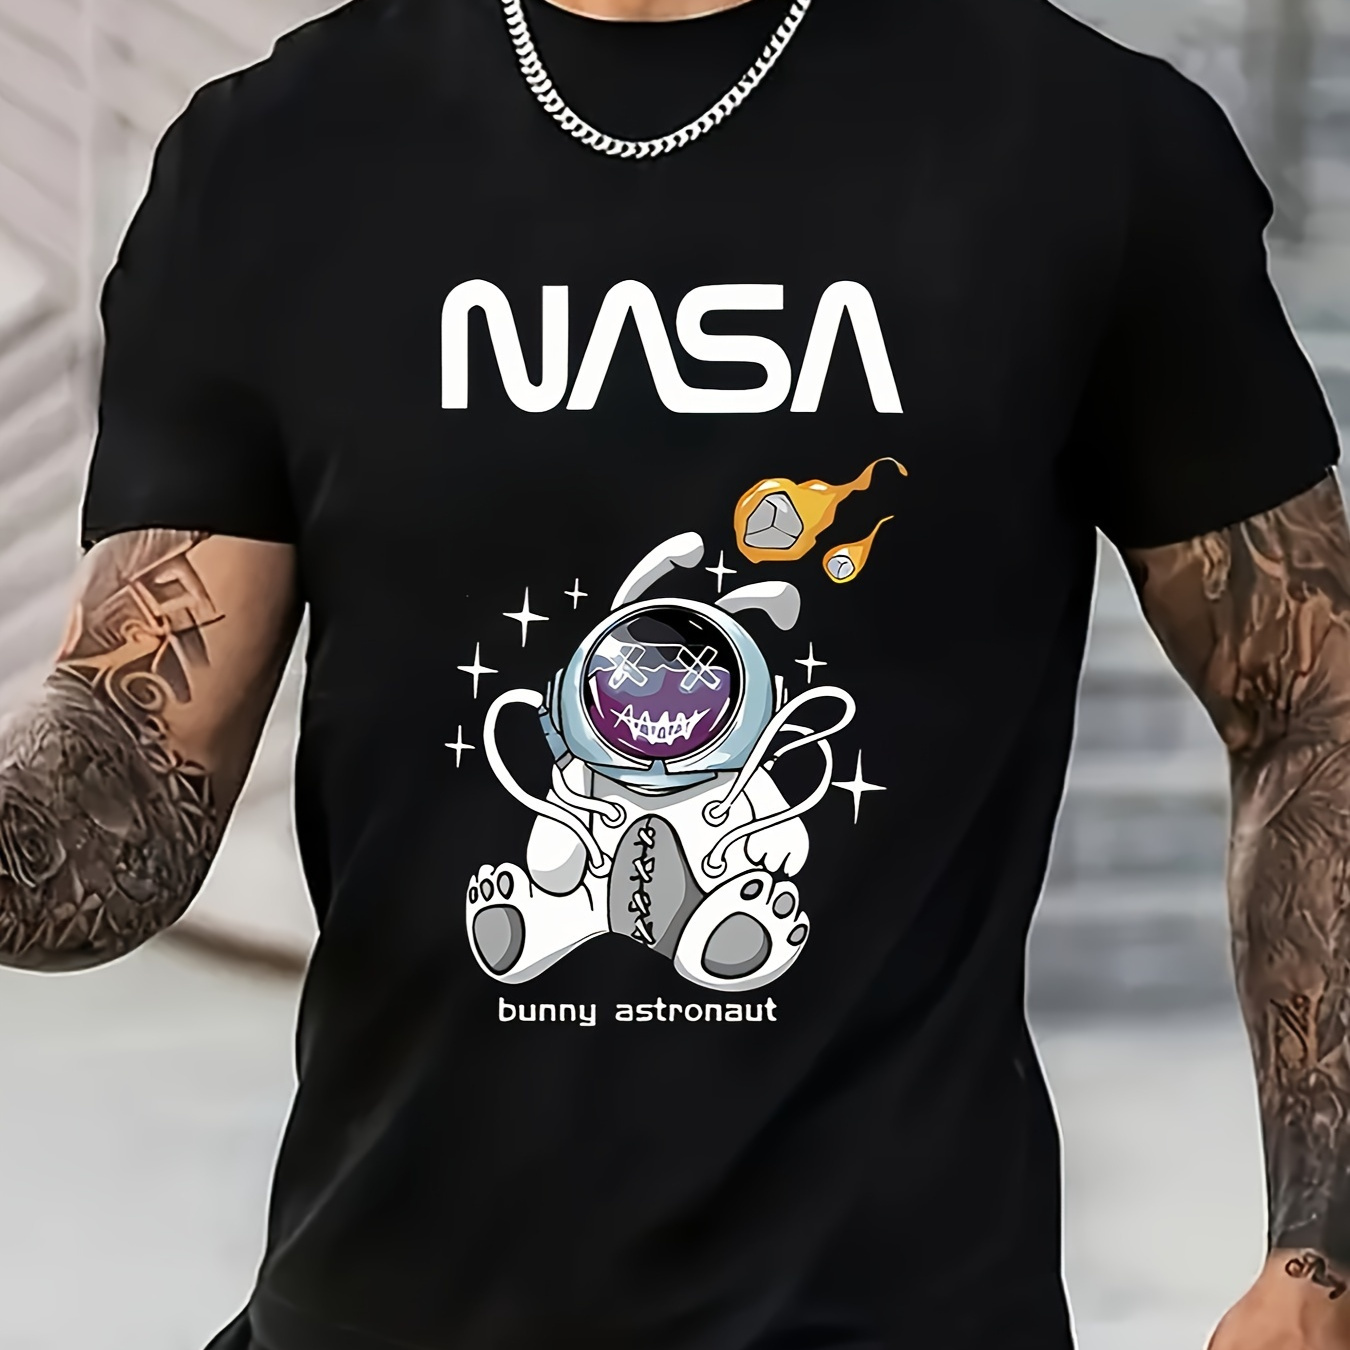 

Astronaut Printed T-shirt Men's Casual Style Summer And Autumn Slightly Elastic Round Neck T-shirt